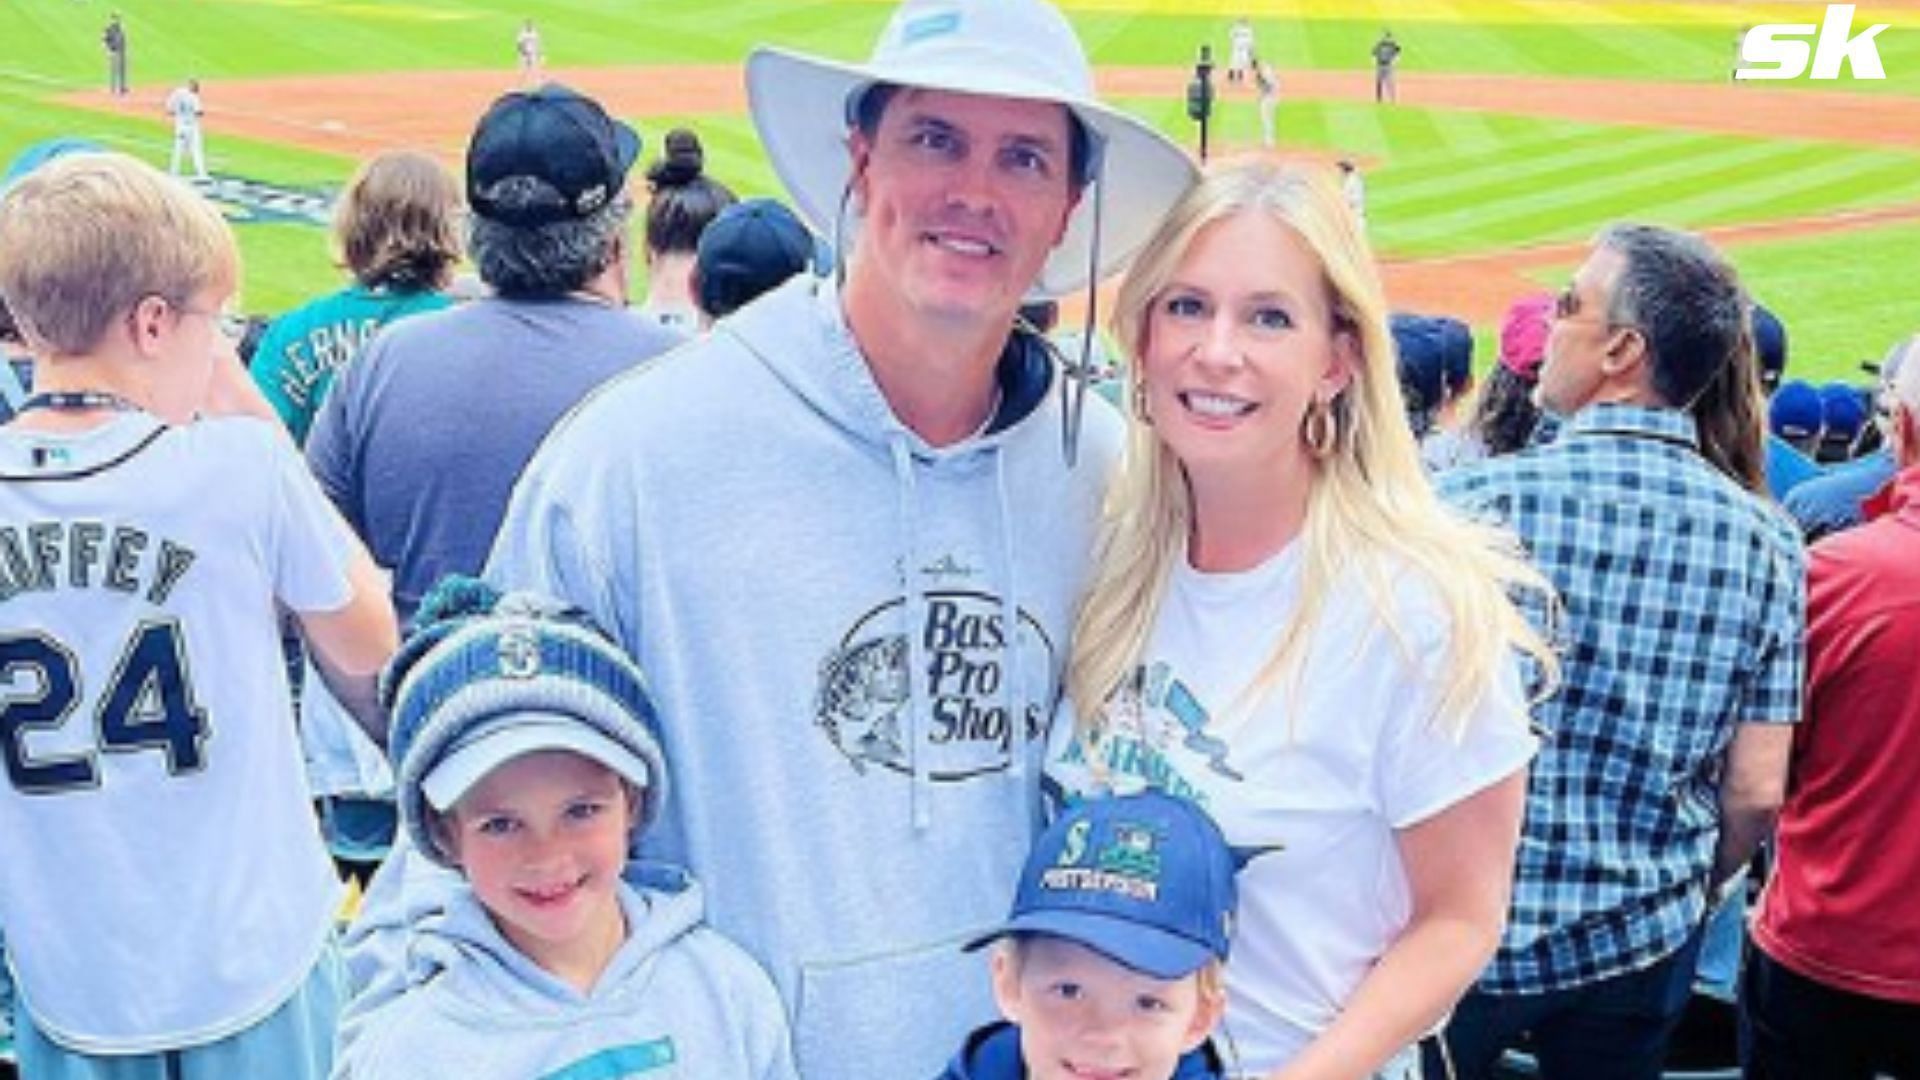 Zack Greinke blended in with fans at Astros-Mariners game